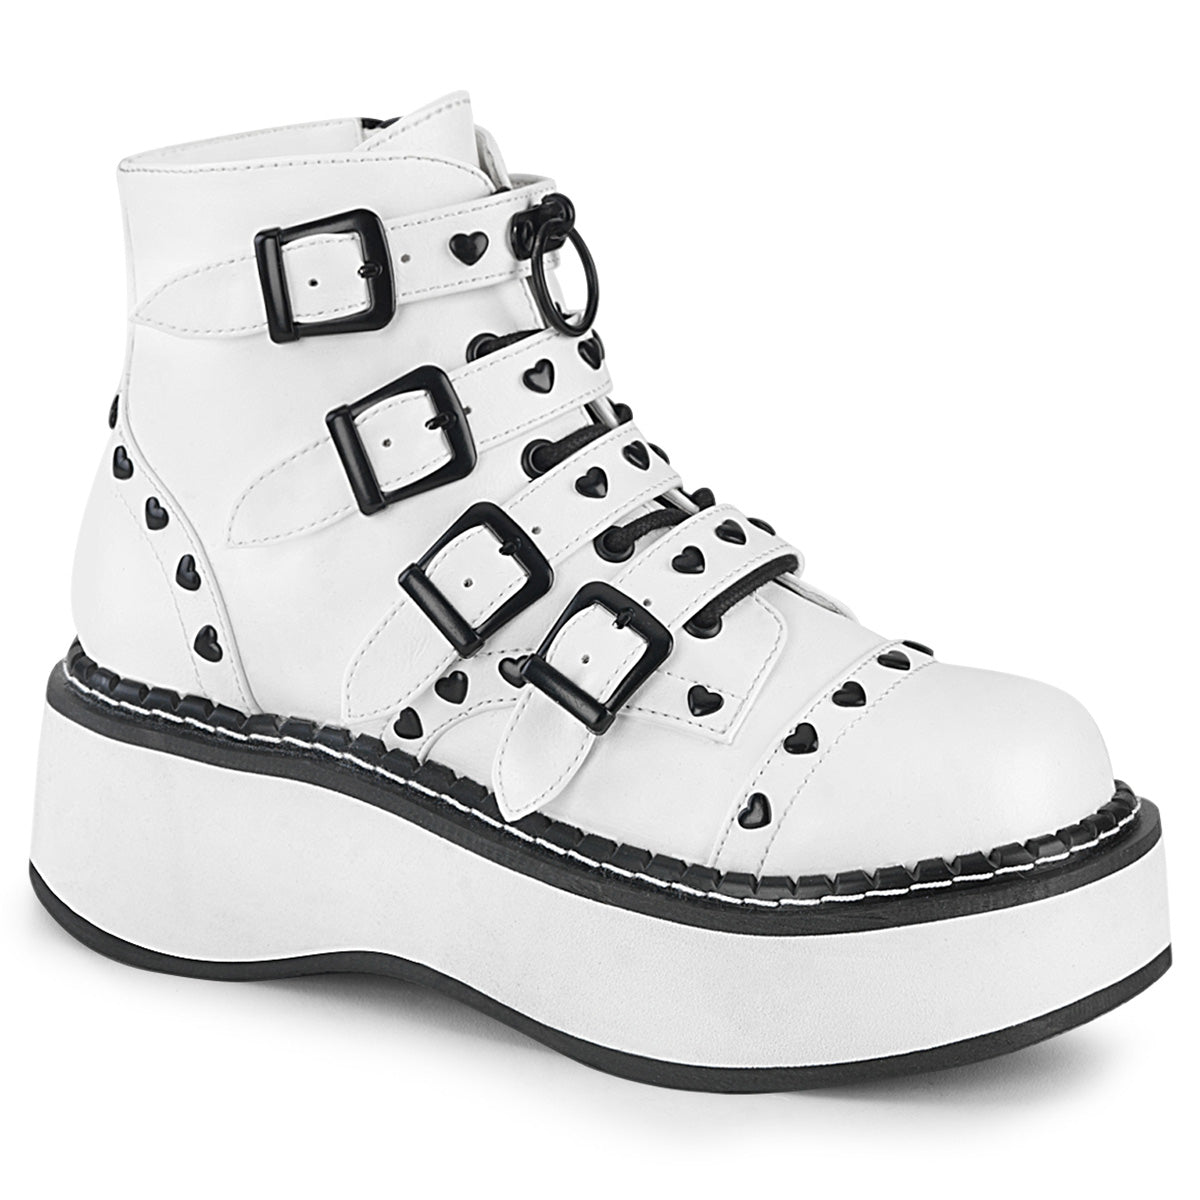 Demonia Emily 315 White - Model Express VancouverBoots